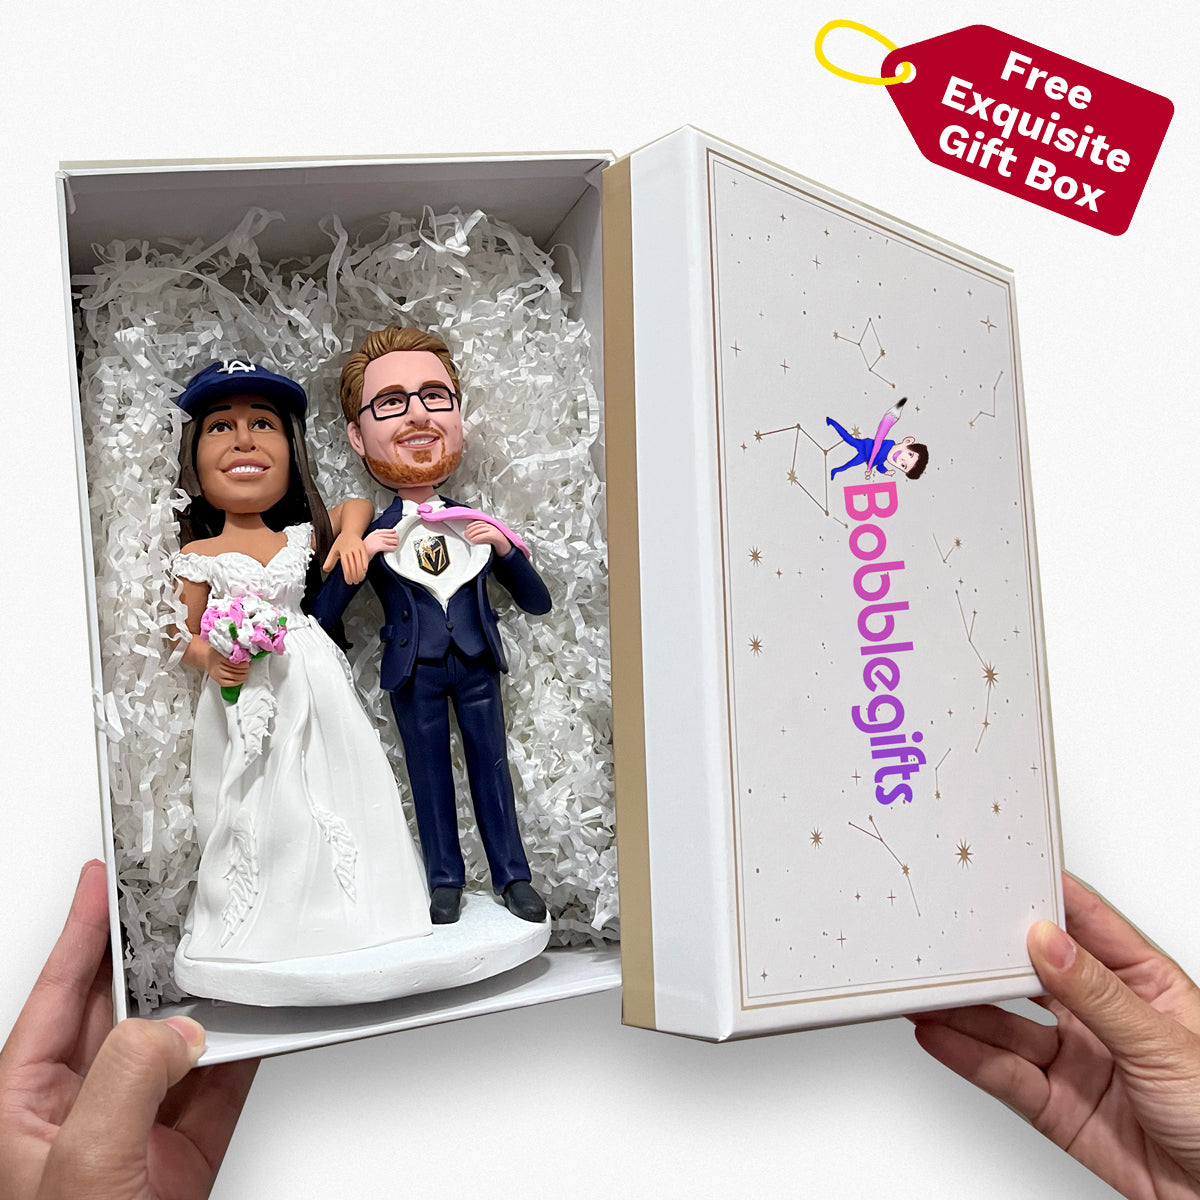 Mother of Bride Personalized Bobbleheads